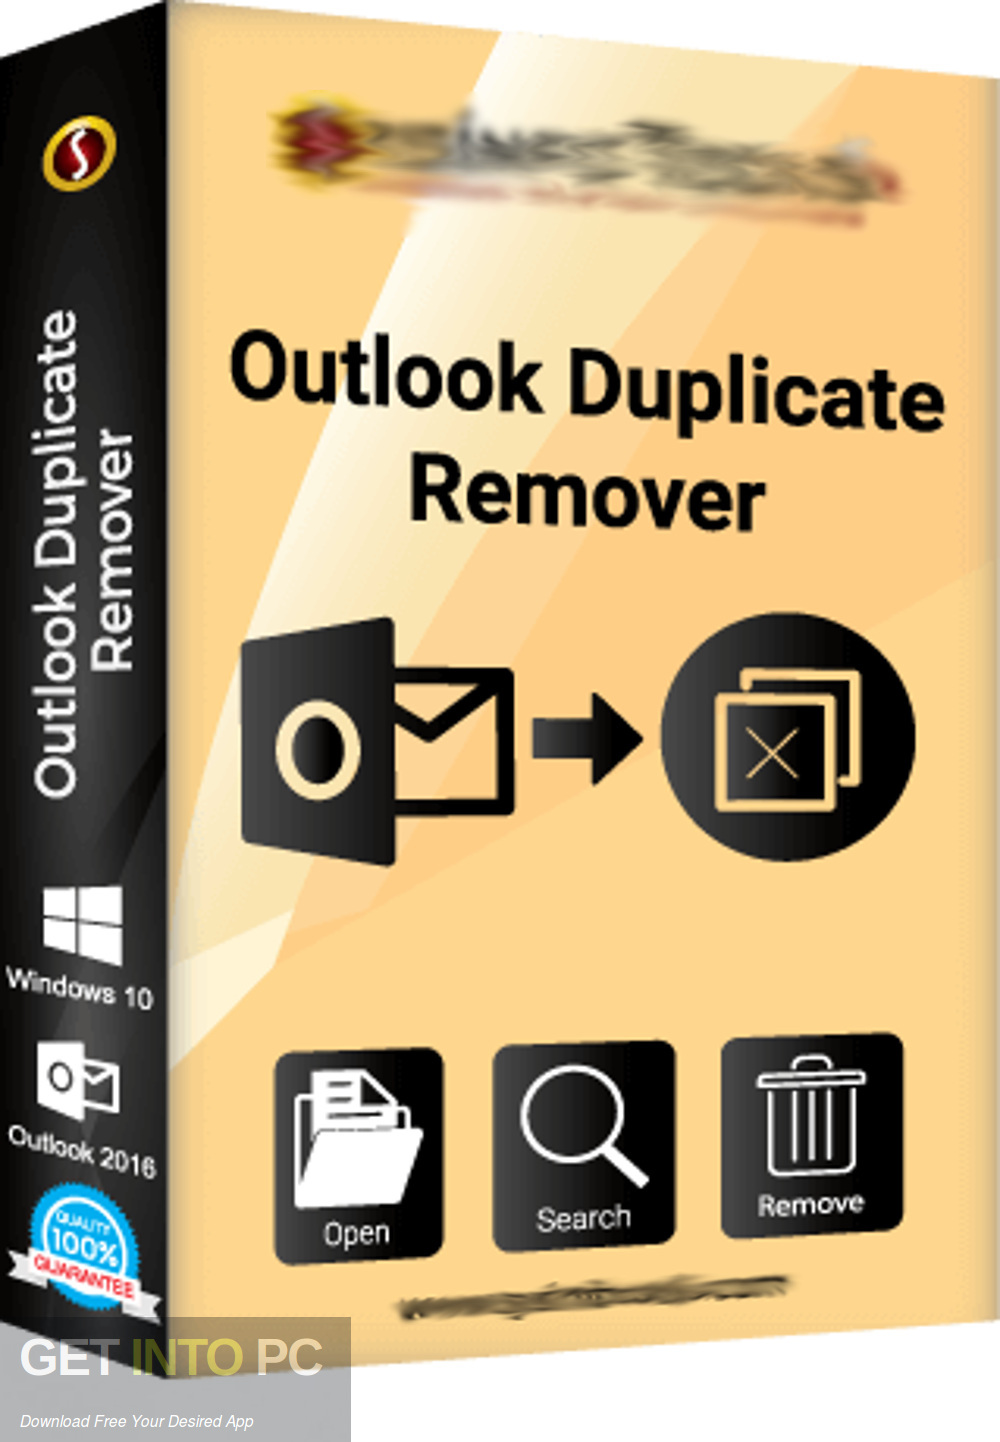 Duplicate Email Remover for Outlook Free Download-GetintoPC.com